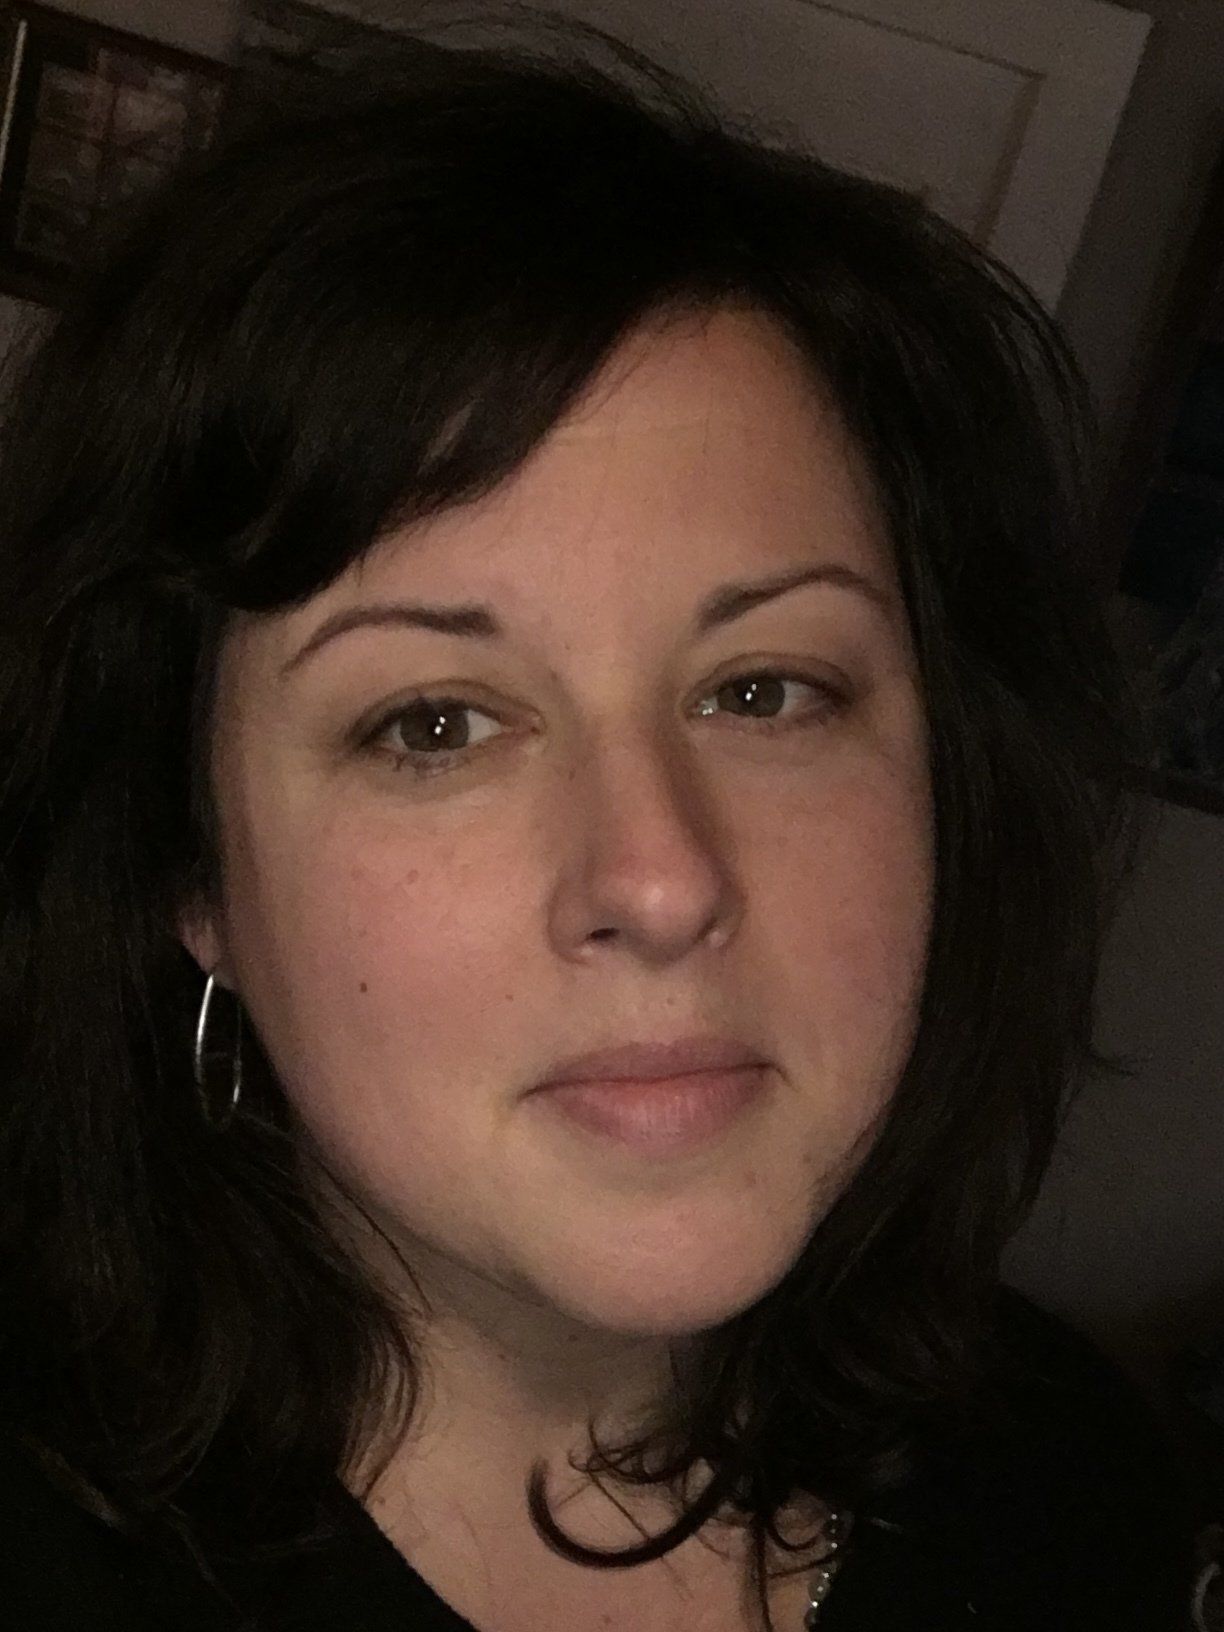 A close up of a woman 's face wearing a black shirt and earrings.